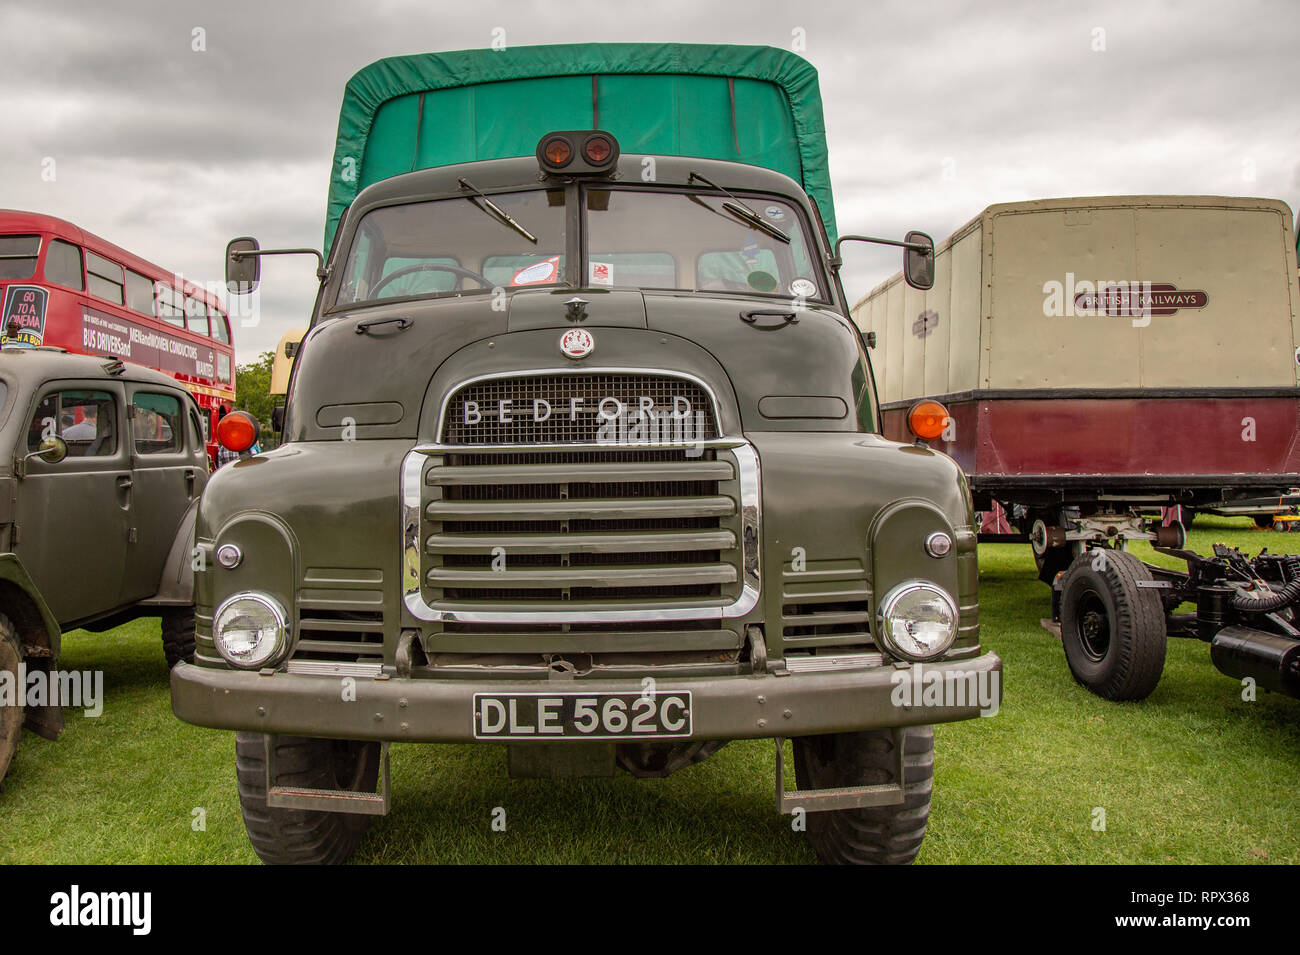 Enfield, Middlesex, England, UK - May 24, 2015: Front view of an old Green  Bedford truck at a car show Stock Photo - Alamy